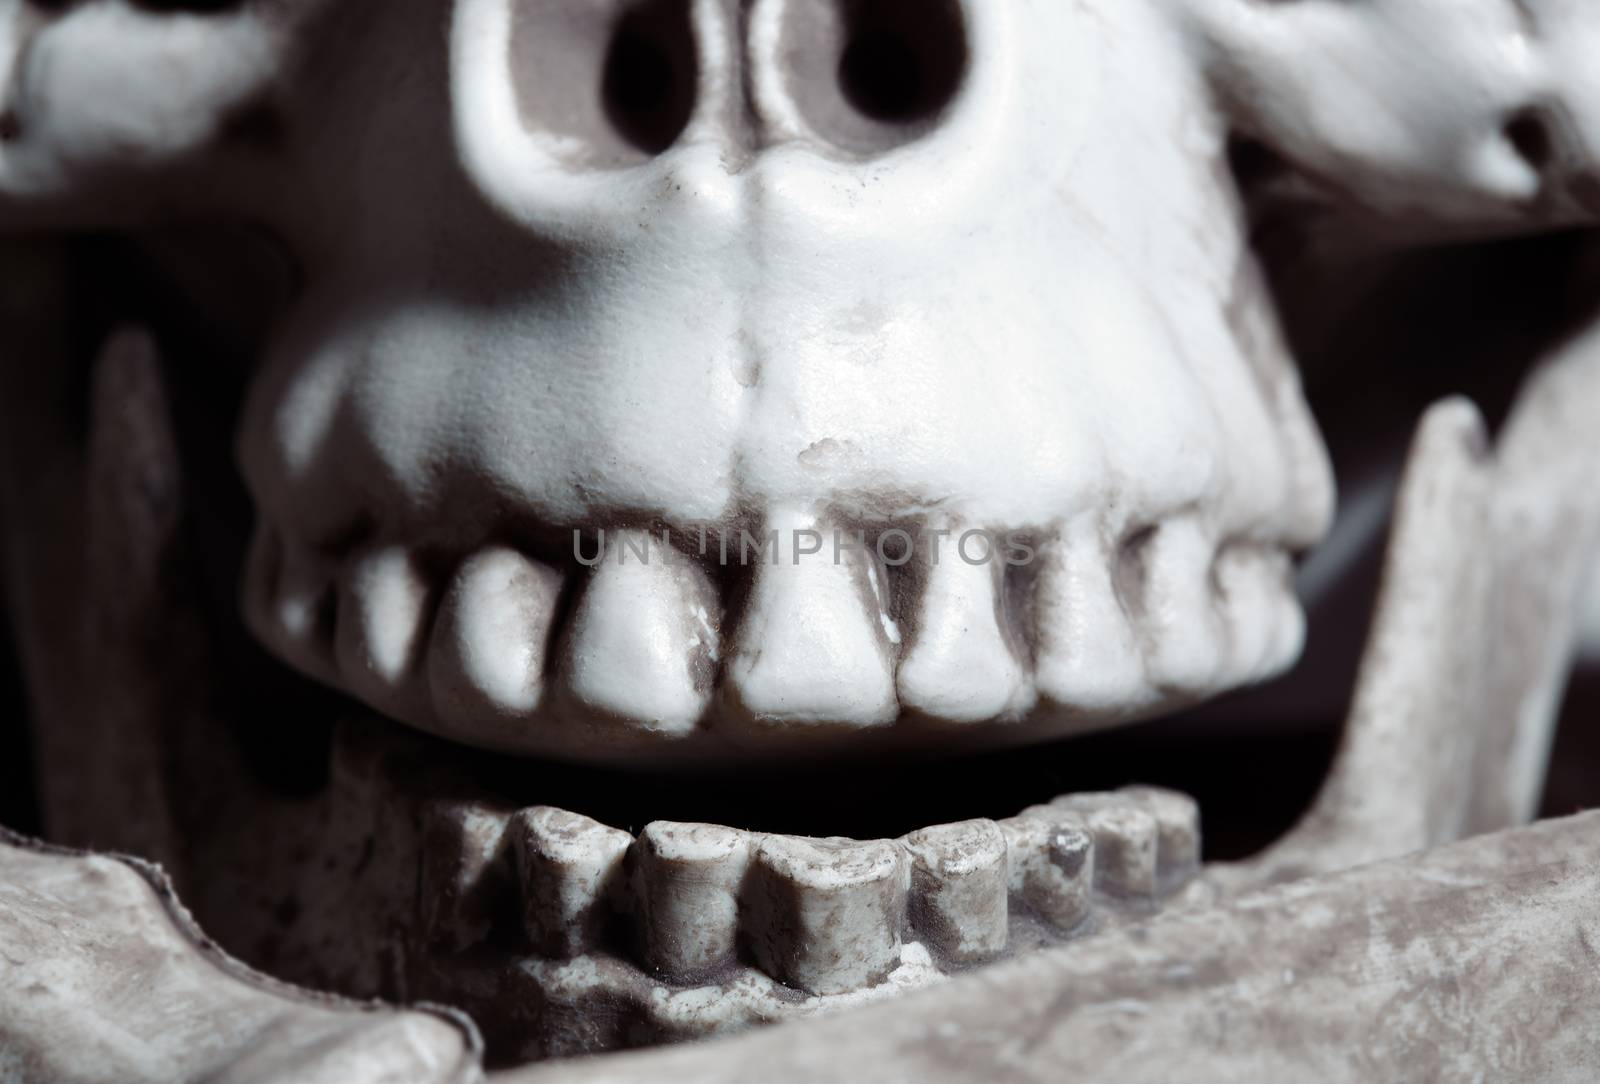 Close-up view on the human skull by Novic